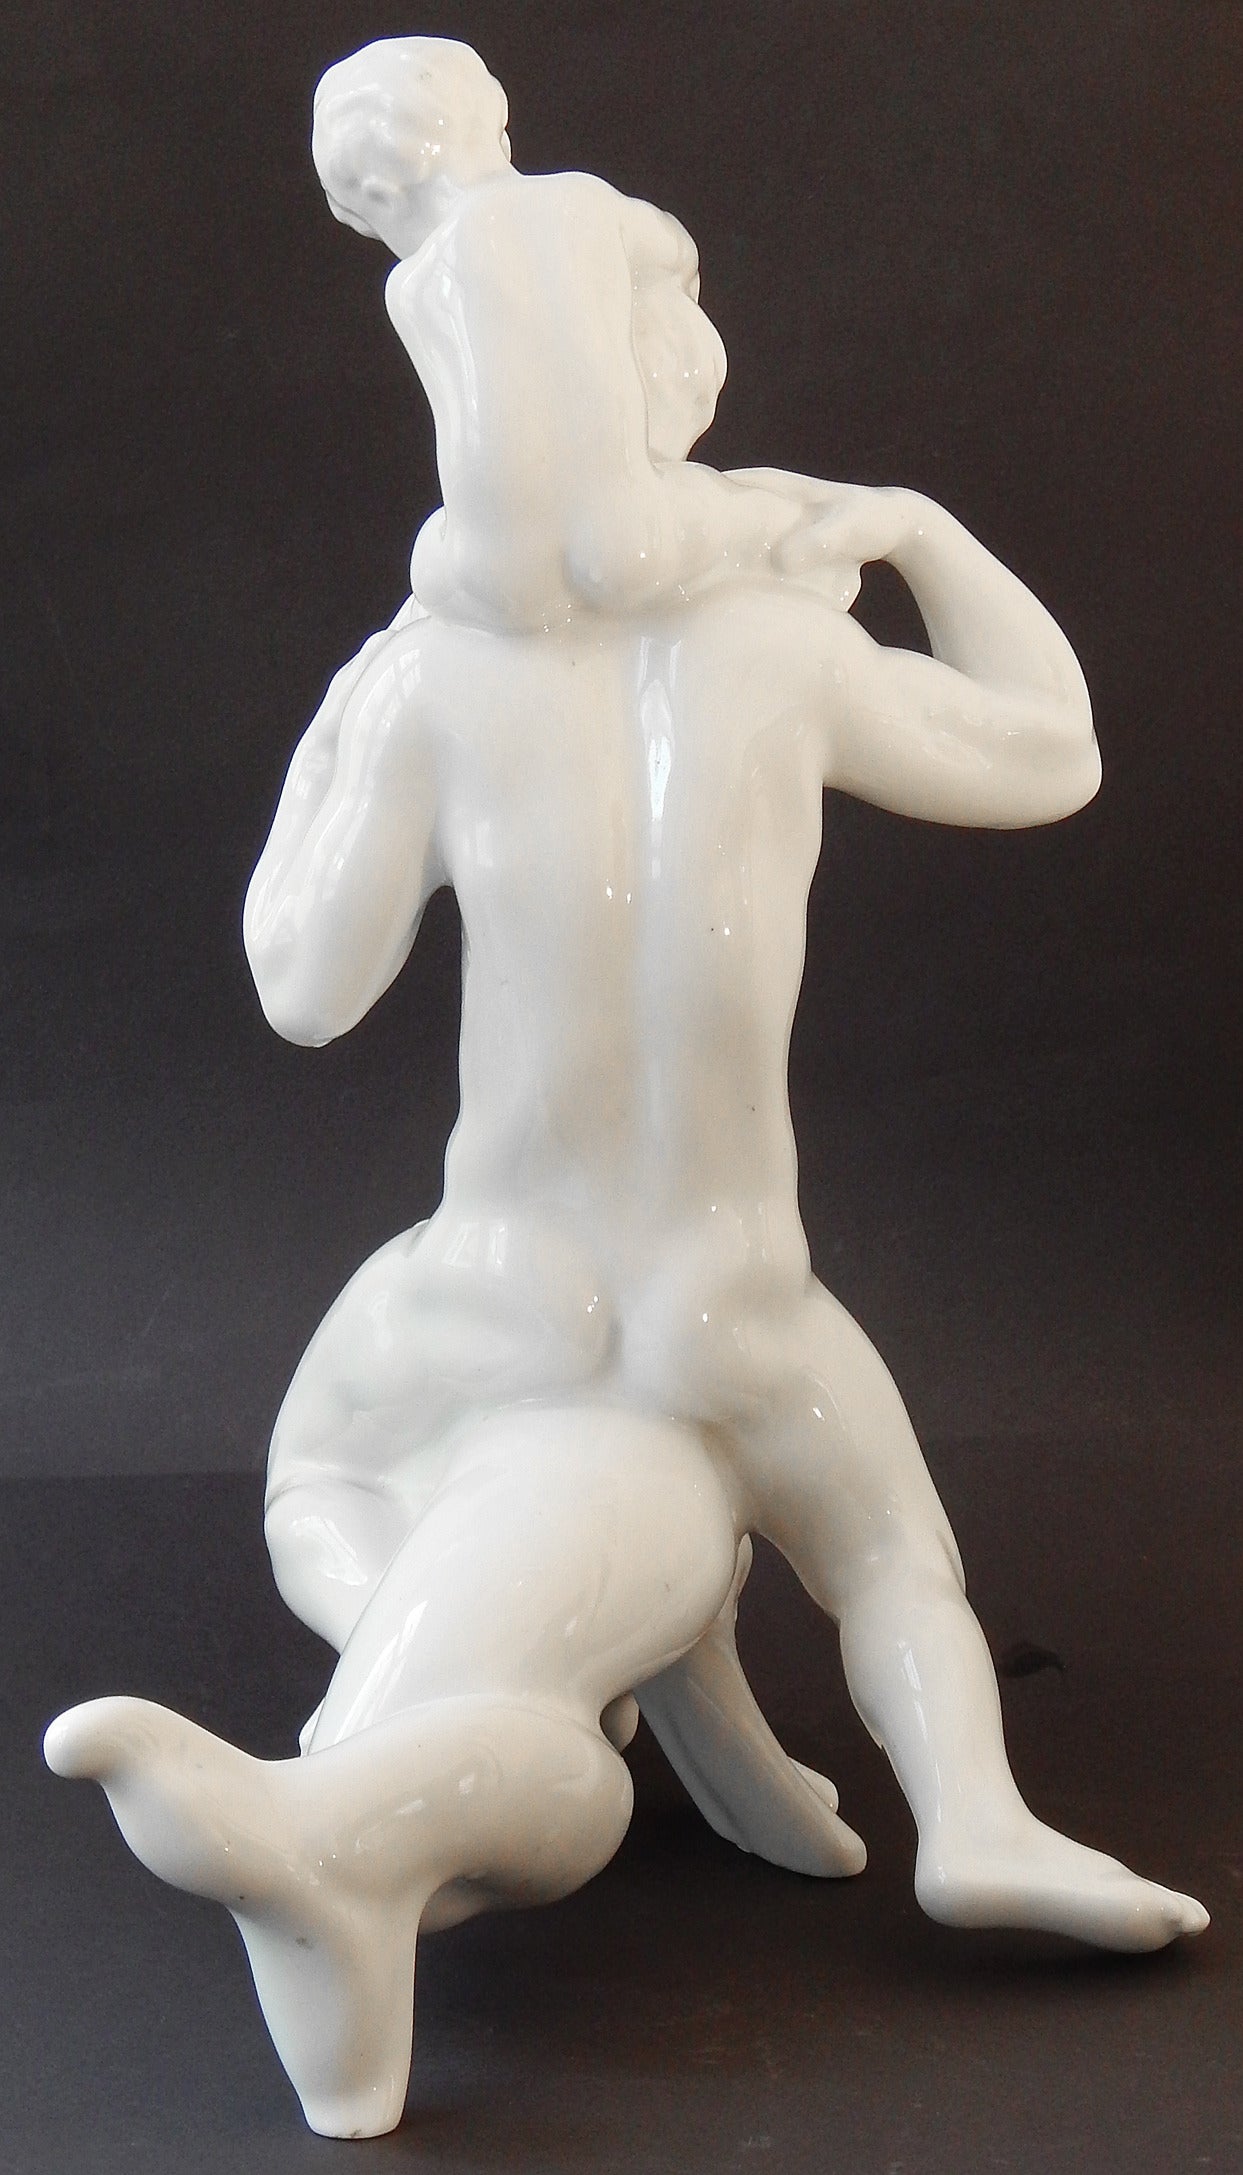 Sleek and sensual, this large, extraordinary porcelain sculpture was created by Kai Nielsen, Denmark's leading figurative sculptor in the first decades of the 20th century. Nielsen was fascinated with nude human figures relating to sea animals such